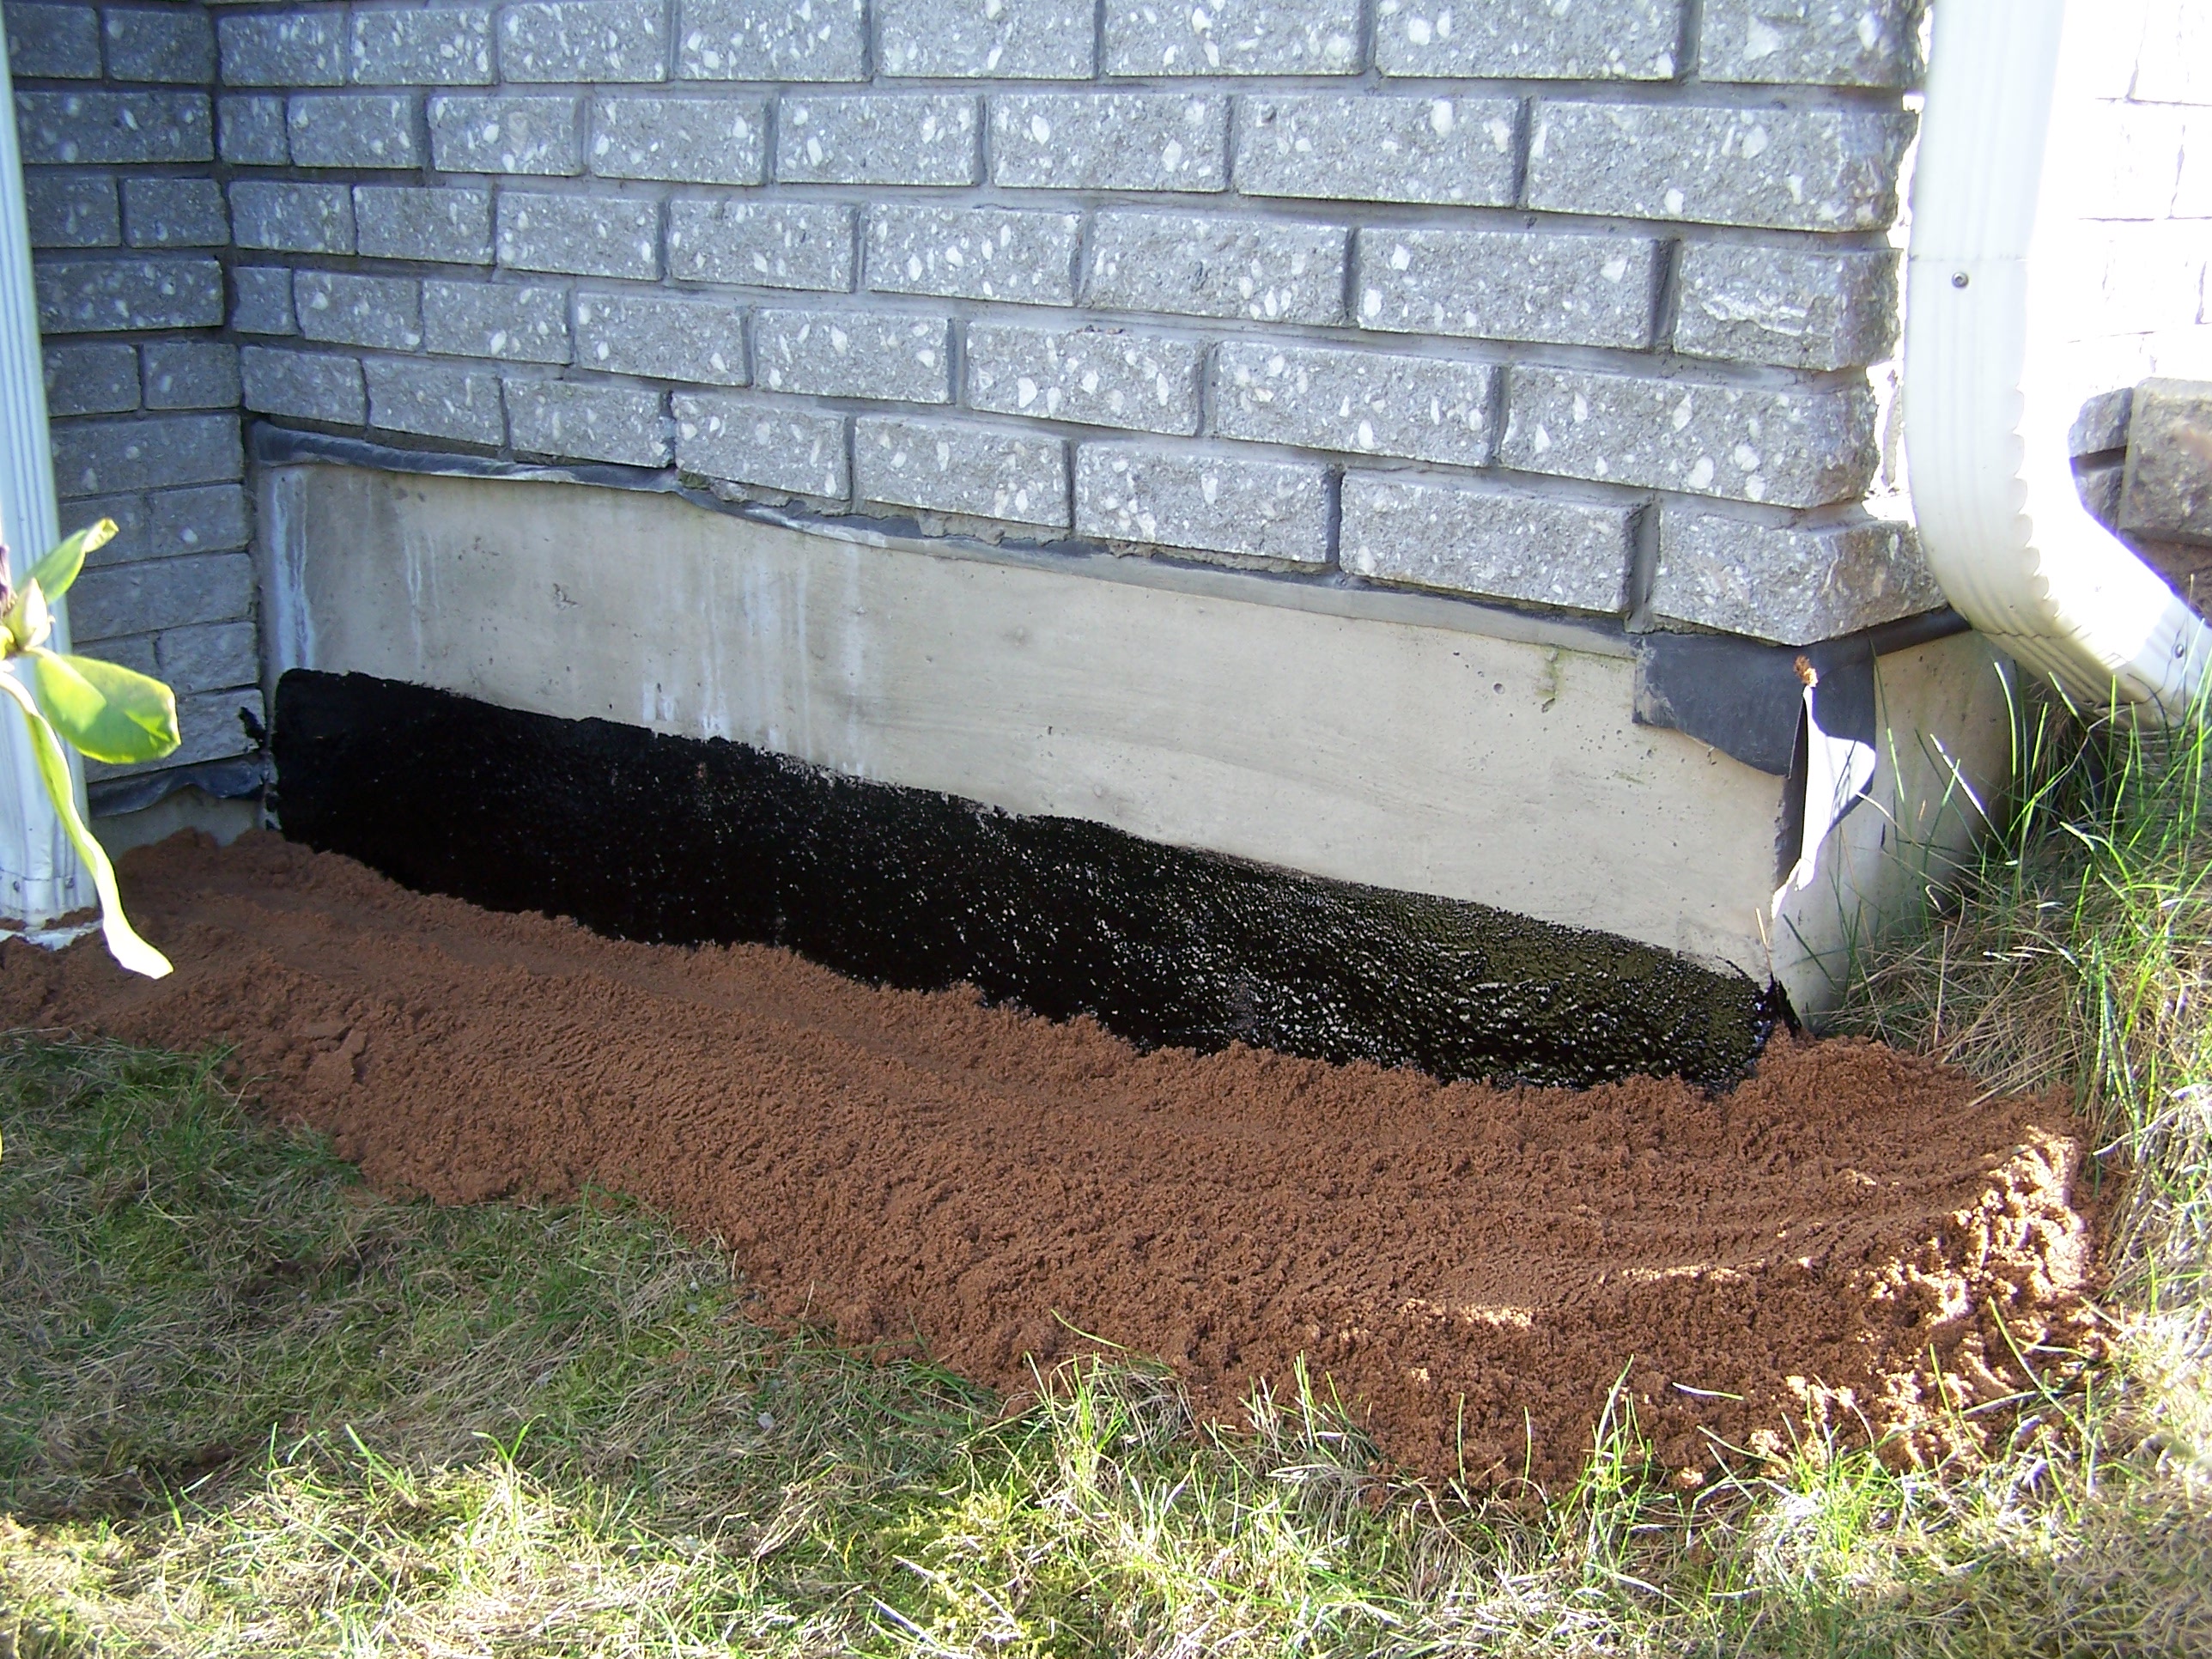 image of concrete foundation-foundation repairs completed in Halifax, NS by Pro Chimney Services based in Halifax, NS is providing their concrete foundation repair services to all of the Halifax-Dartmouth Regional Municipality, Bedford, Sackville, Mount Uniacke, Hantsport, Windsor, Wolfville, Kentville, Chester Basin, Mahone Bay, Lunenburg, Bridgewater, Liverpool, Fall River, Wellington, Enfield, Elmsdale, Brookfield, Truro, Musquodoboit Harbour & surrounding areas.